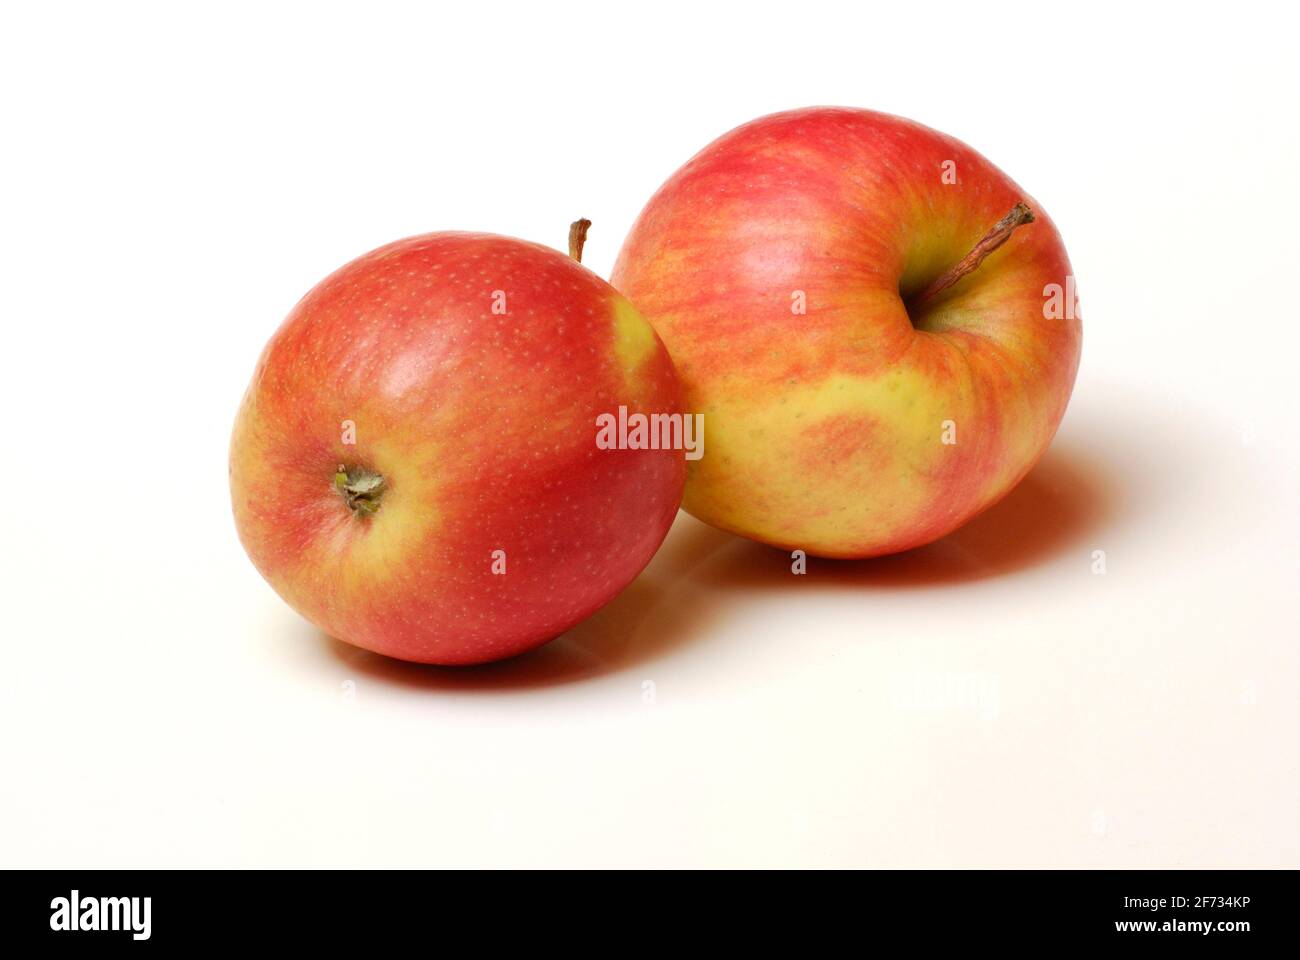 Two apples, apple, Pink Lady variety Stock Photo